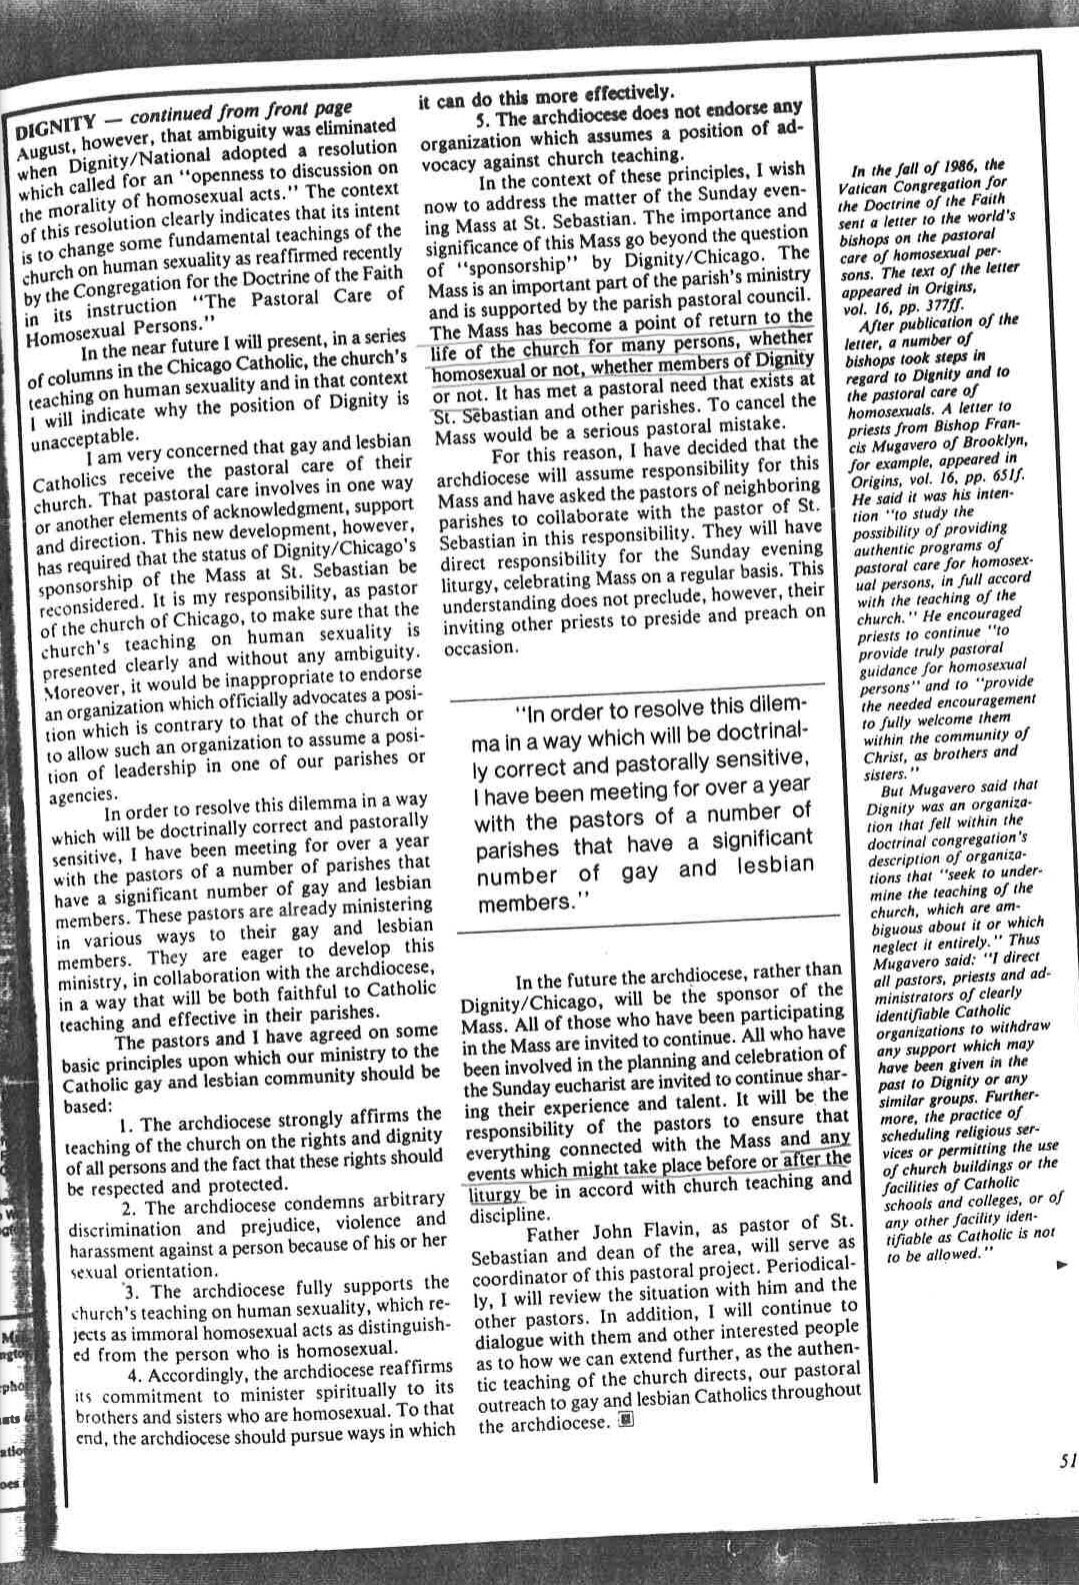 Coverage of Dignity and Arch 1988 p2.jpg